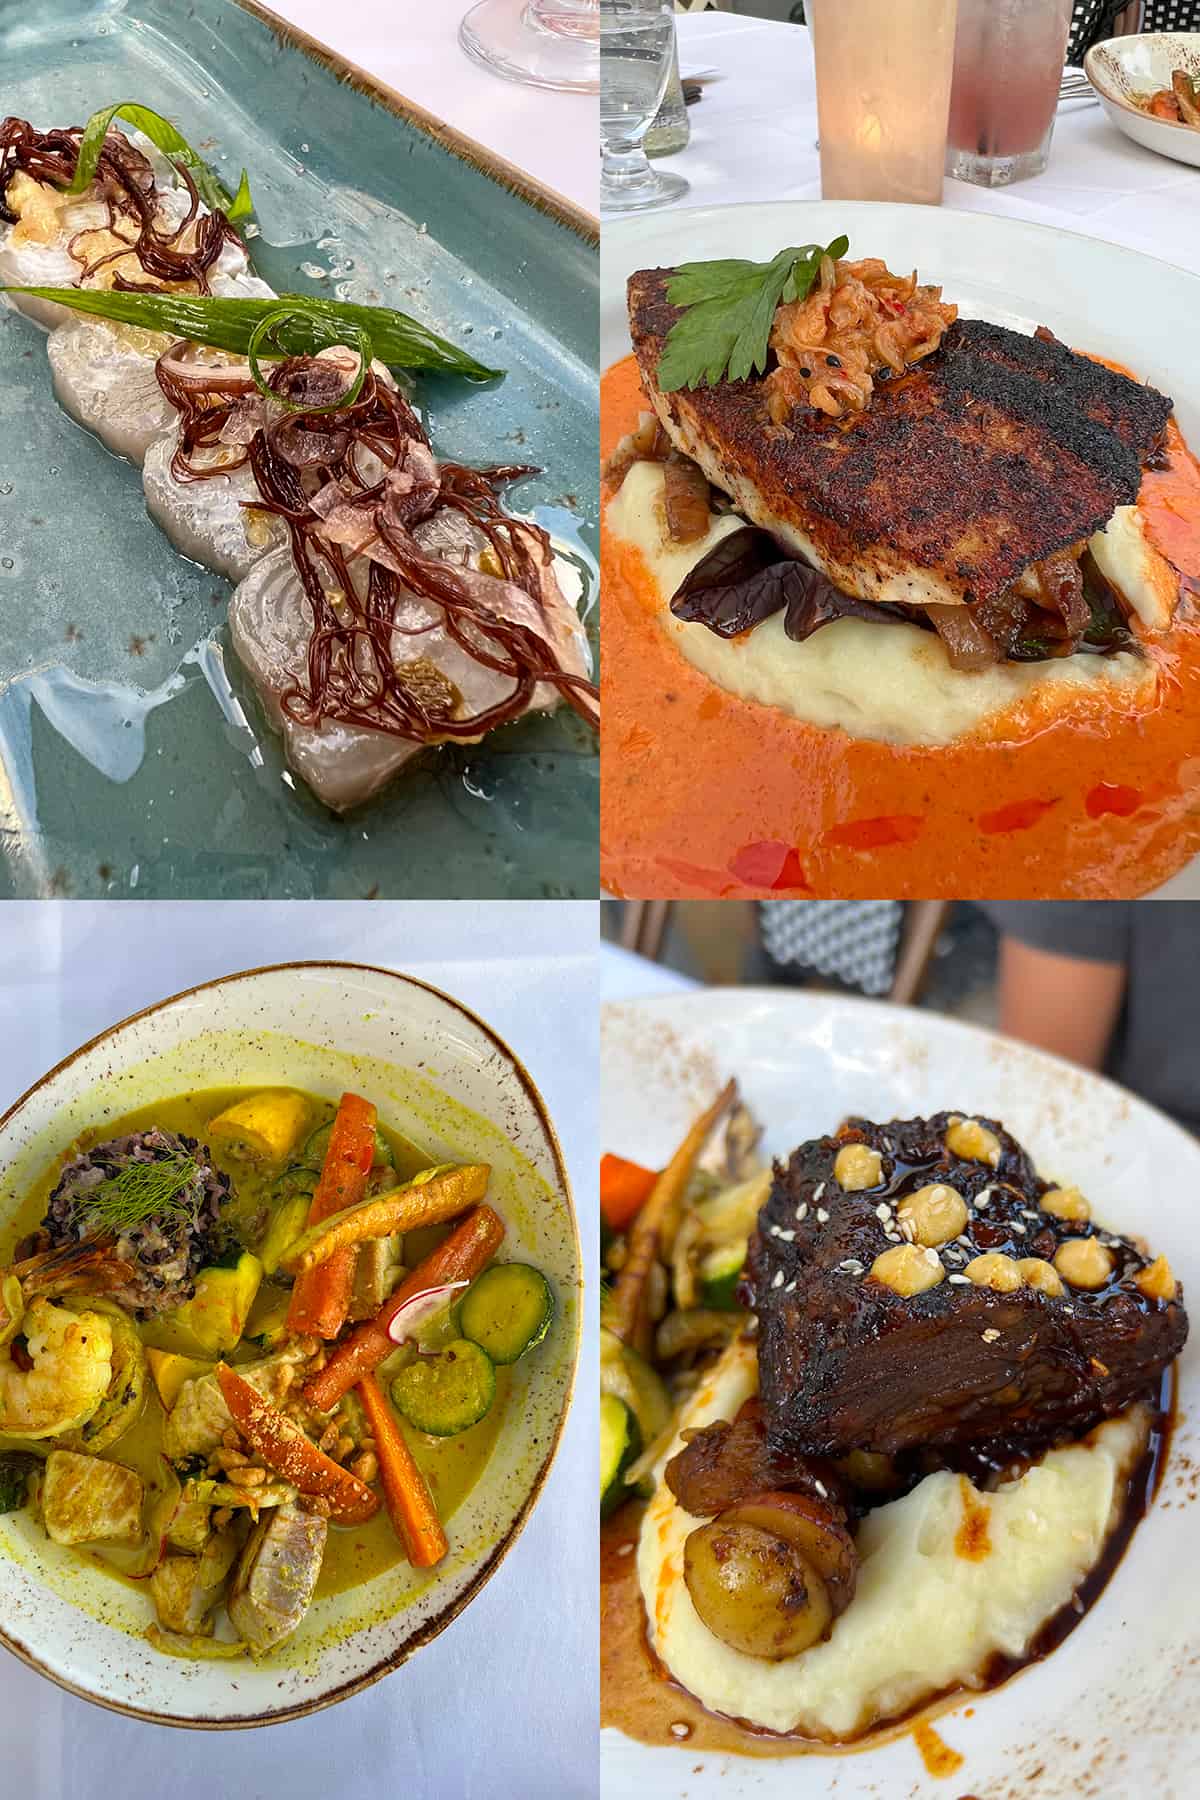 Four gluten free dishes at Pacific'O restaurant in Maui: sashimi, blackened fish, short ribs, and lemongrass curry.